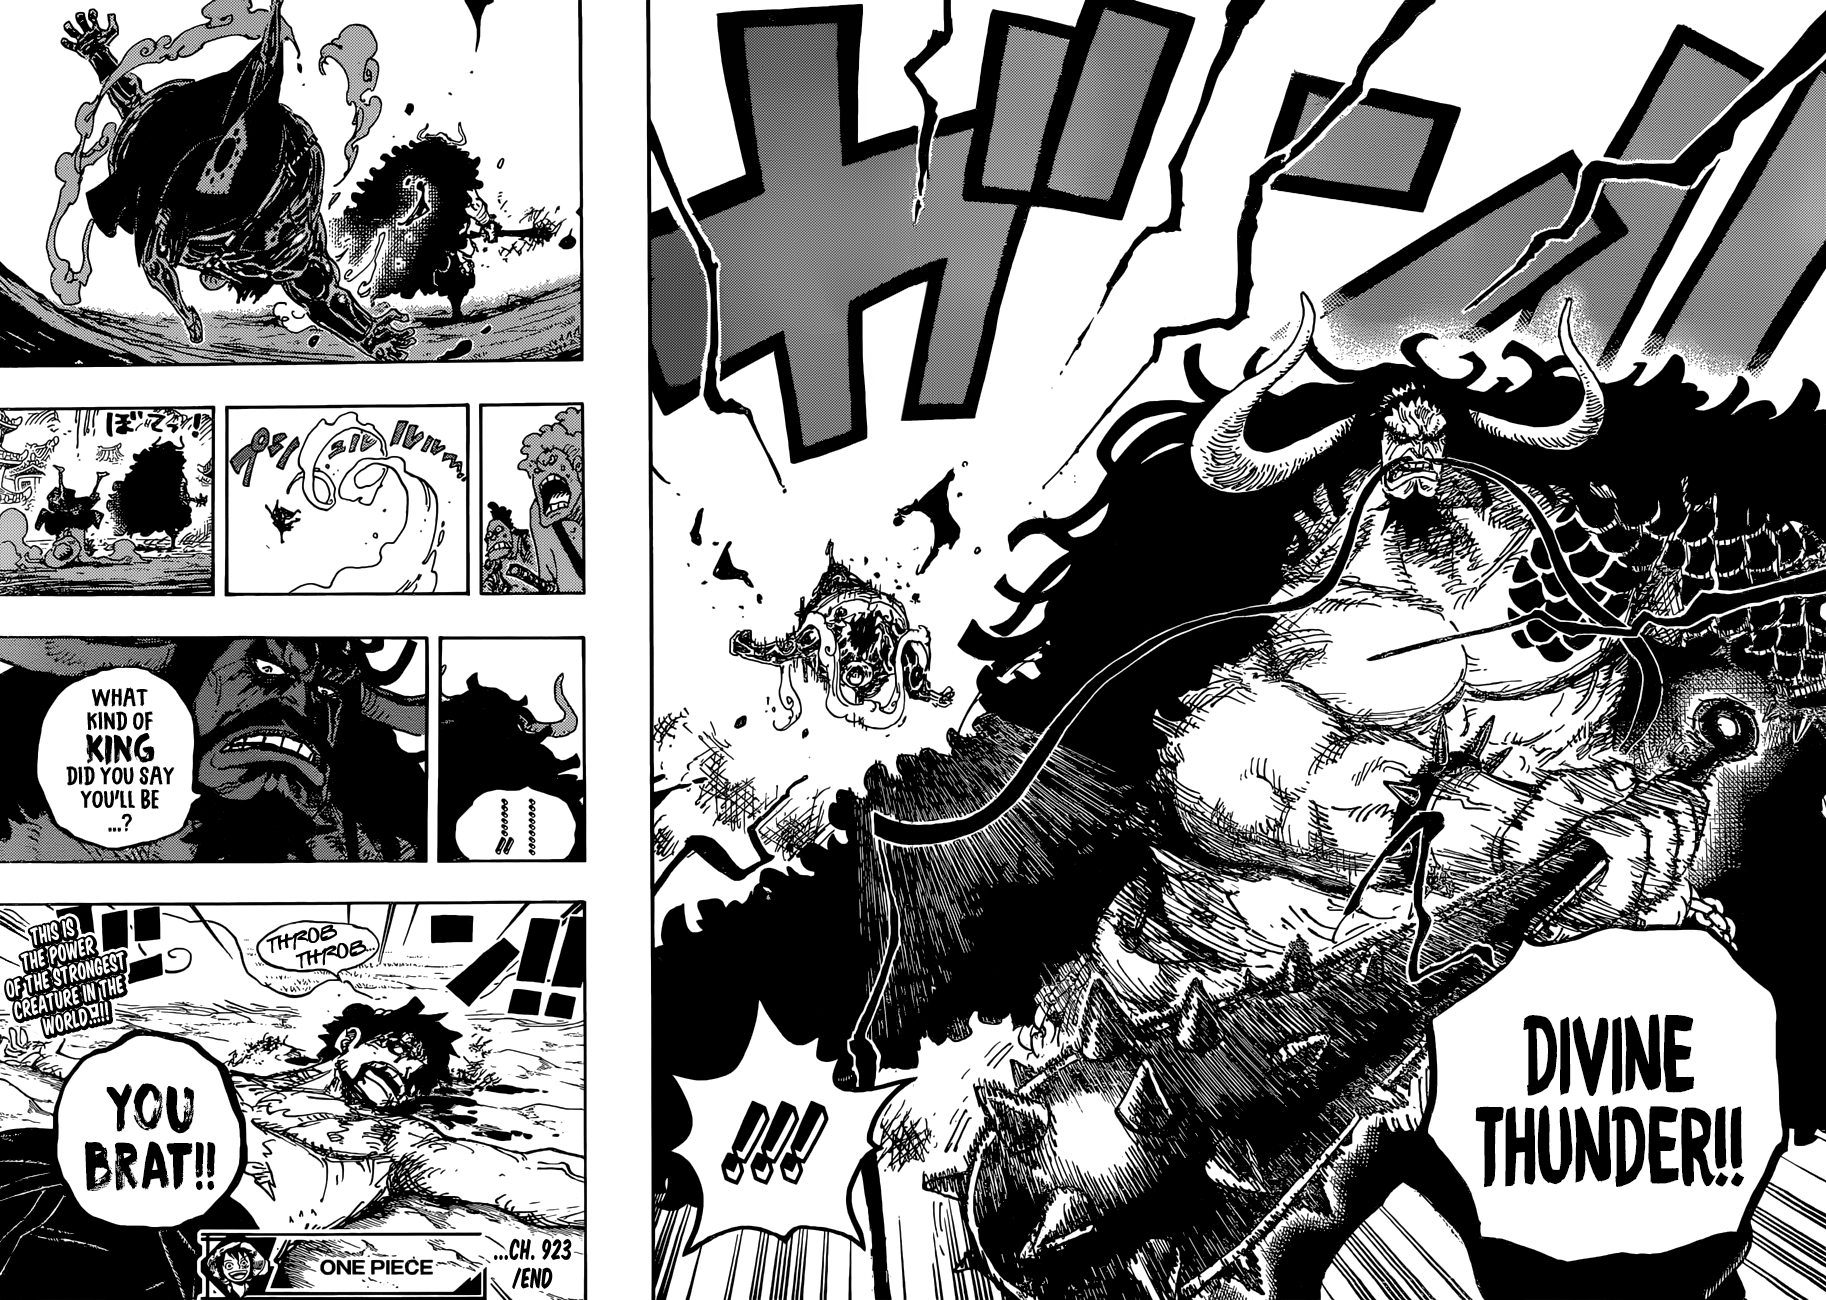 One Piece, Chapter 923 - Emperor Kaidou VS. Luffy image 14